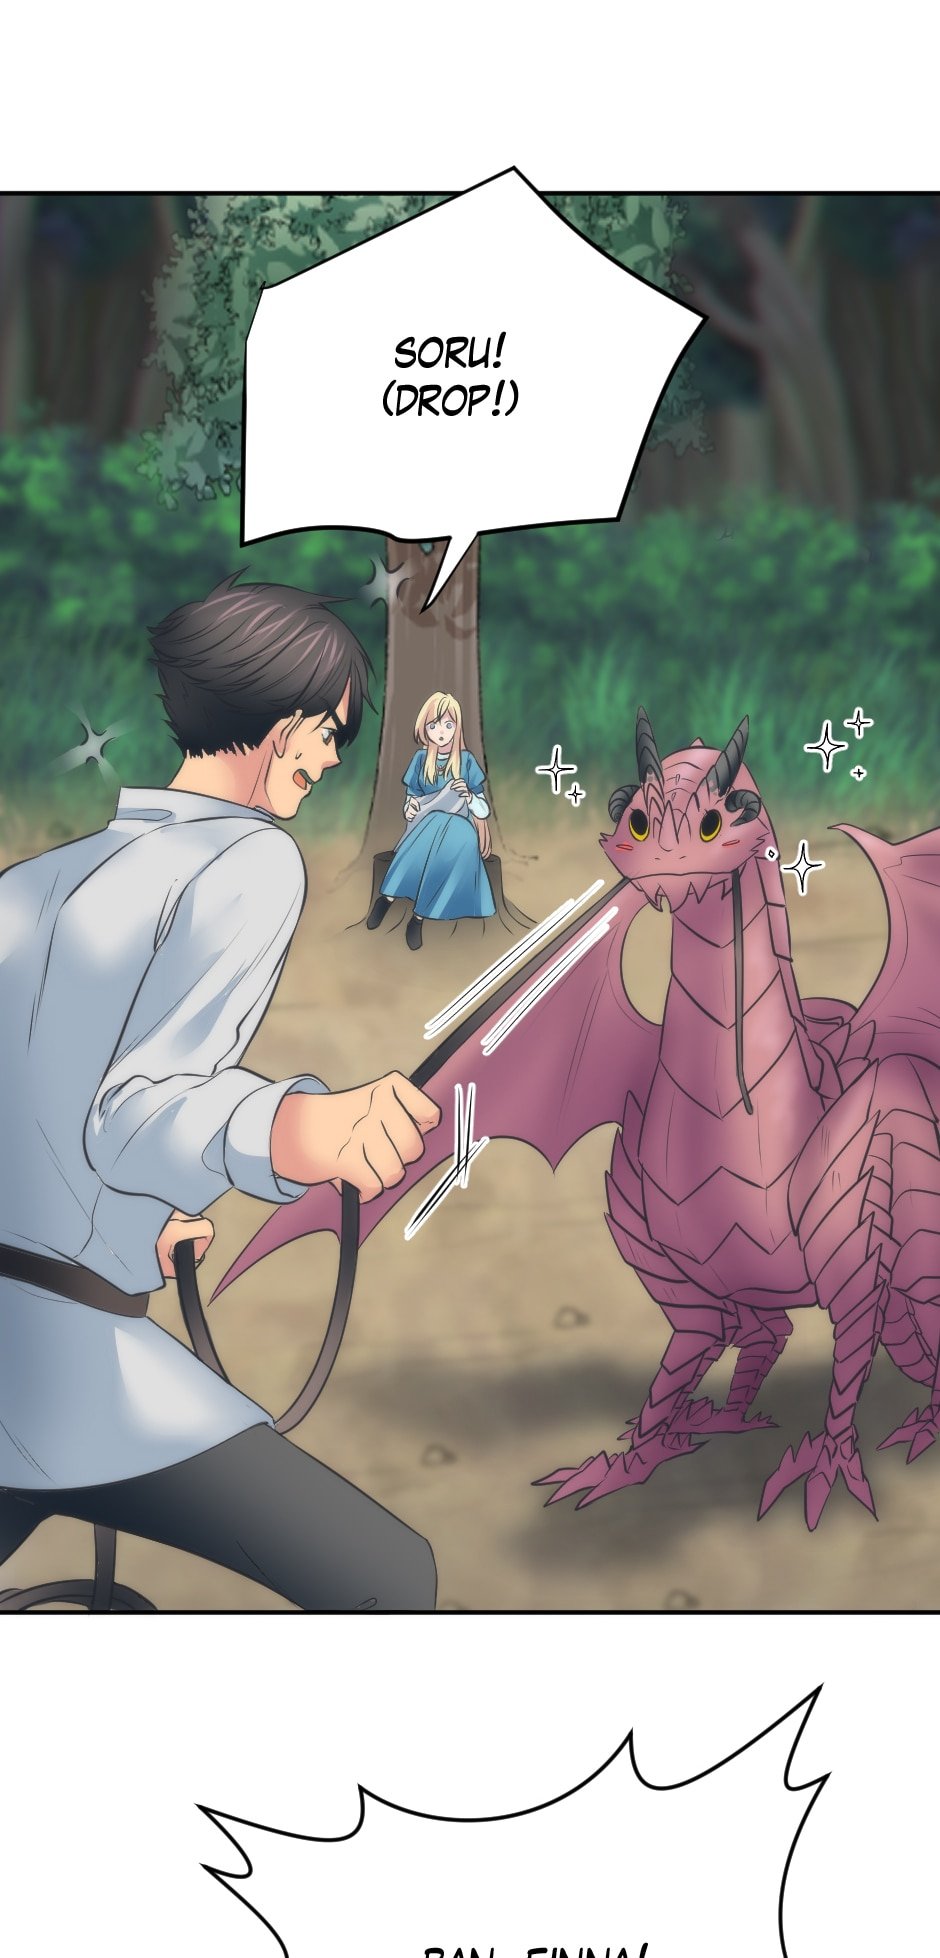 The Dragon Prince’s Bride chapter 25